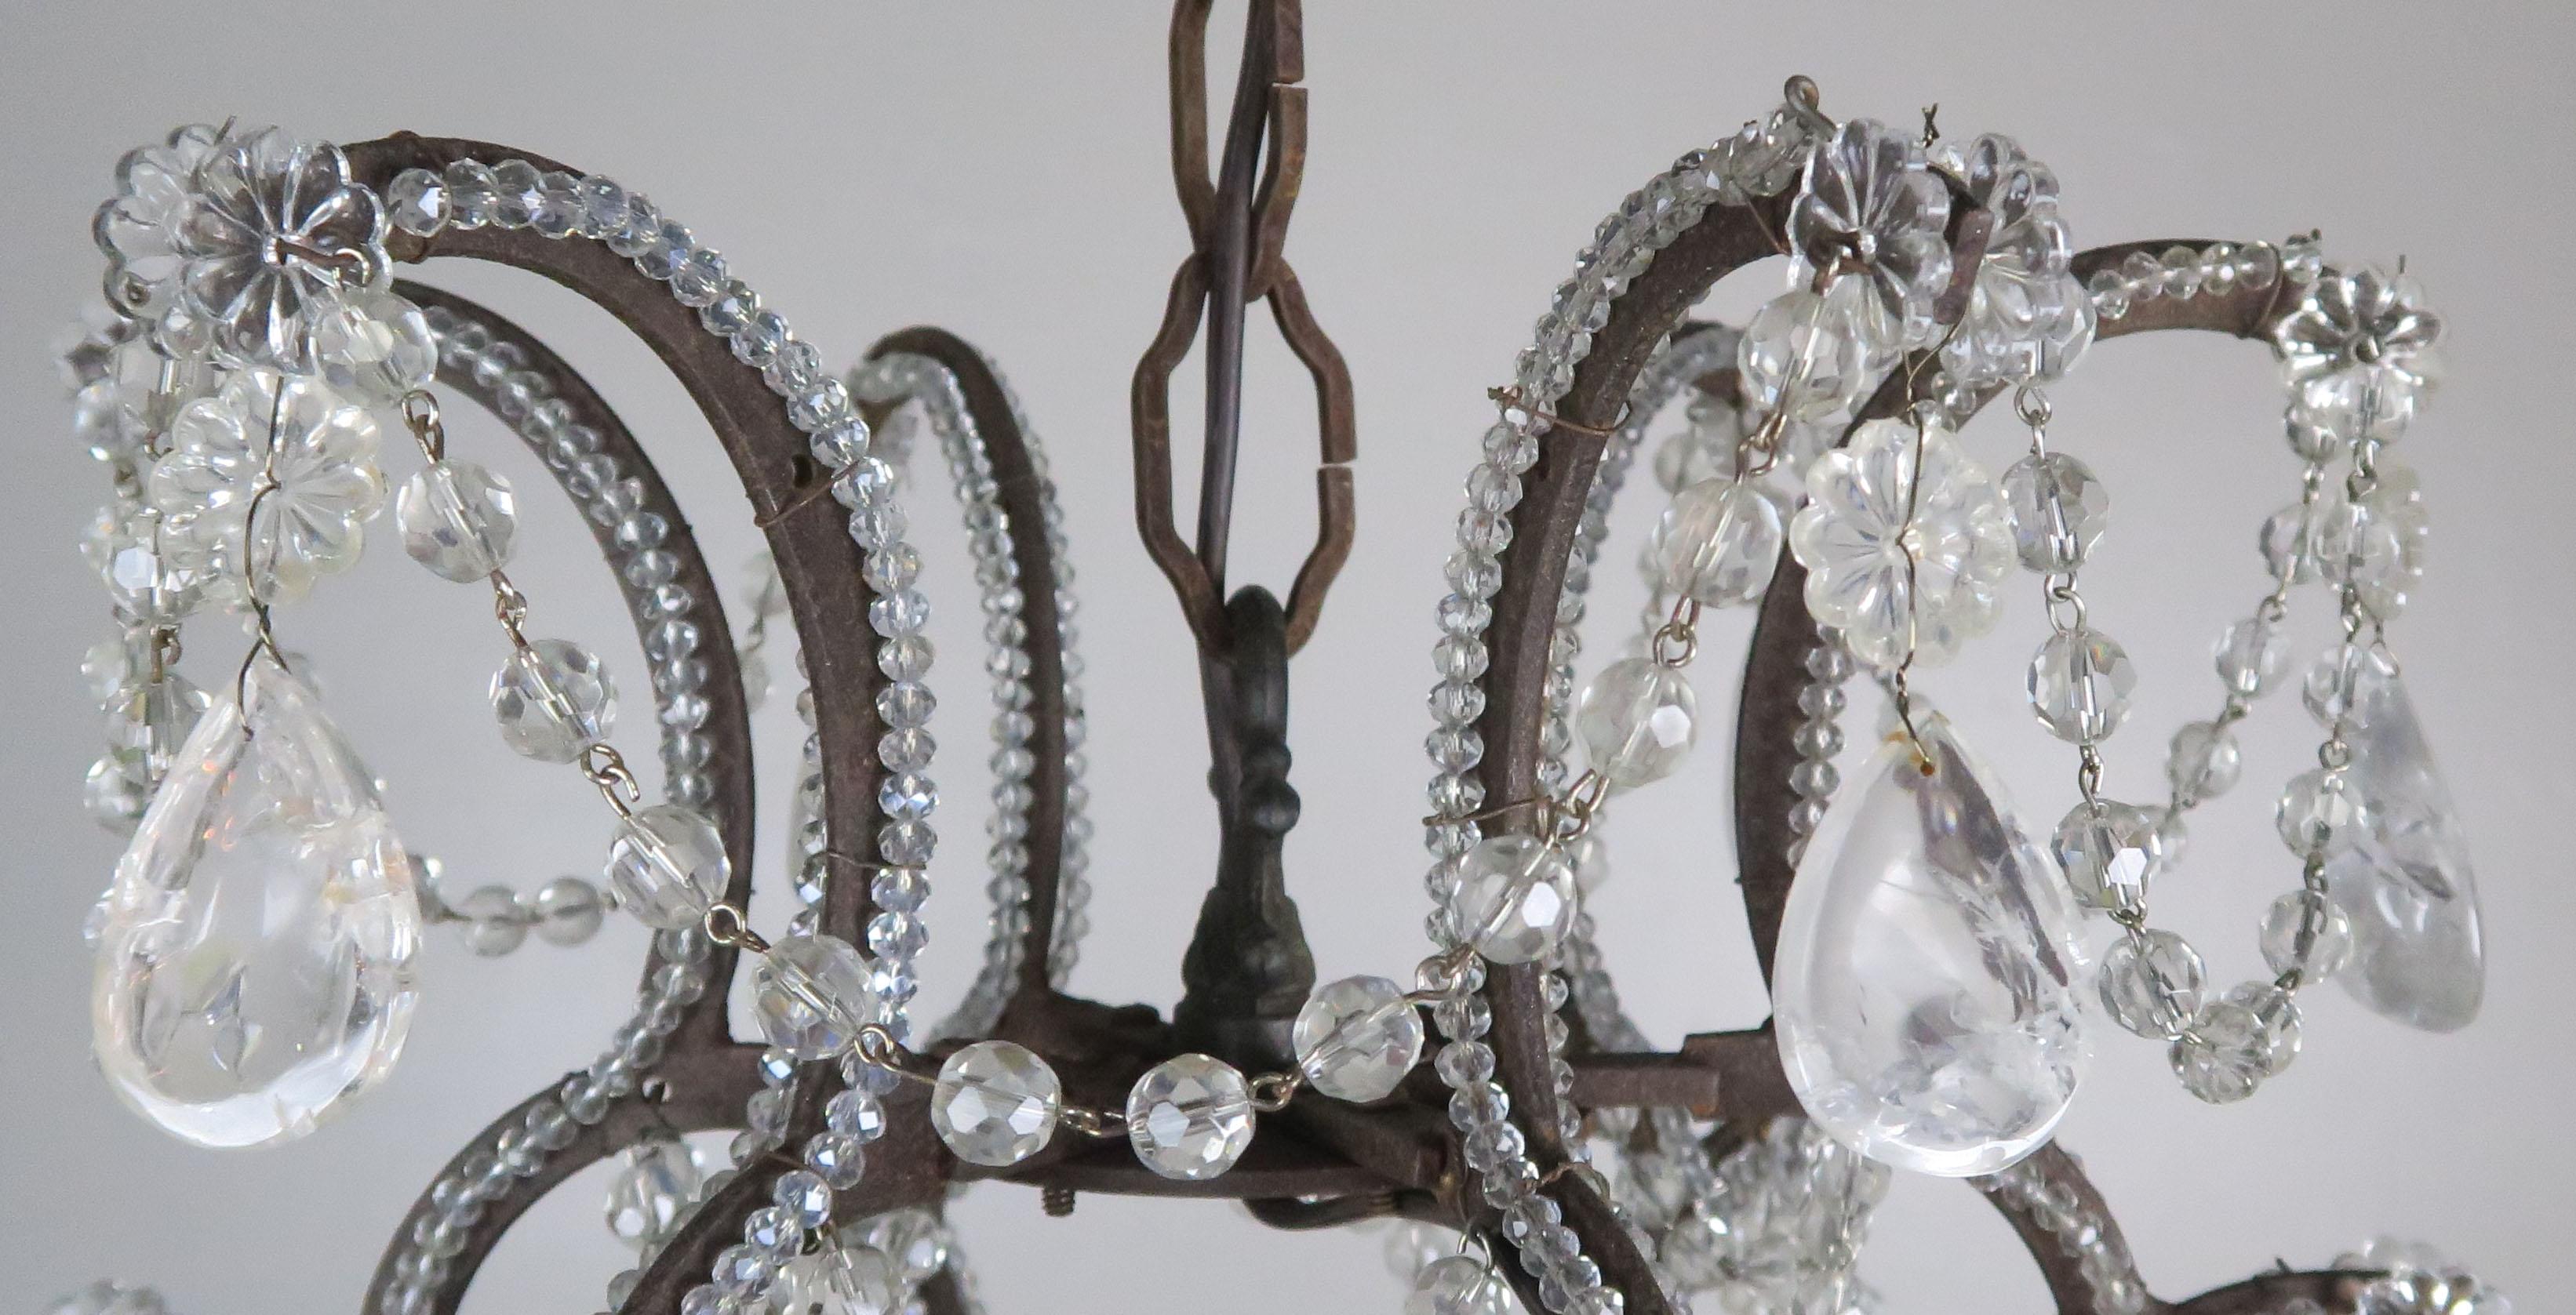 Vintage Italian crystal beaded arm chandelier with garlands of cut beads and almond shaped rock crystals throughout. The fixture is newly rewired with cream candle covers. Includes chain and canopy ready to install.